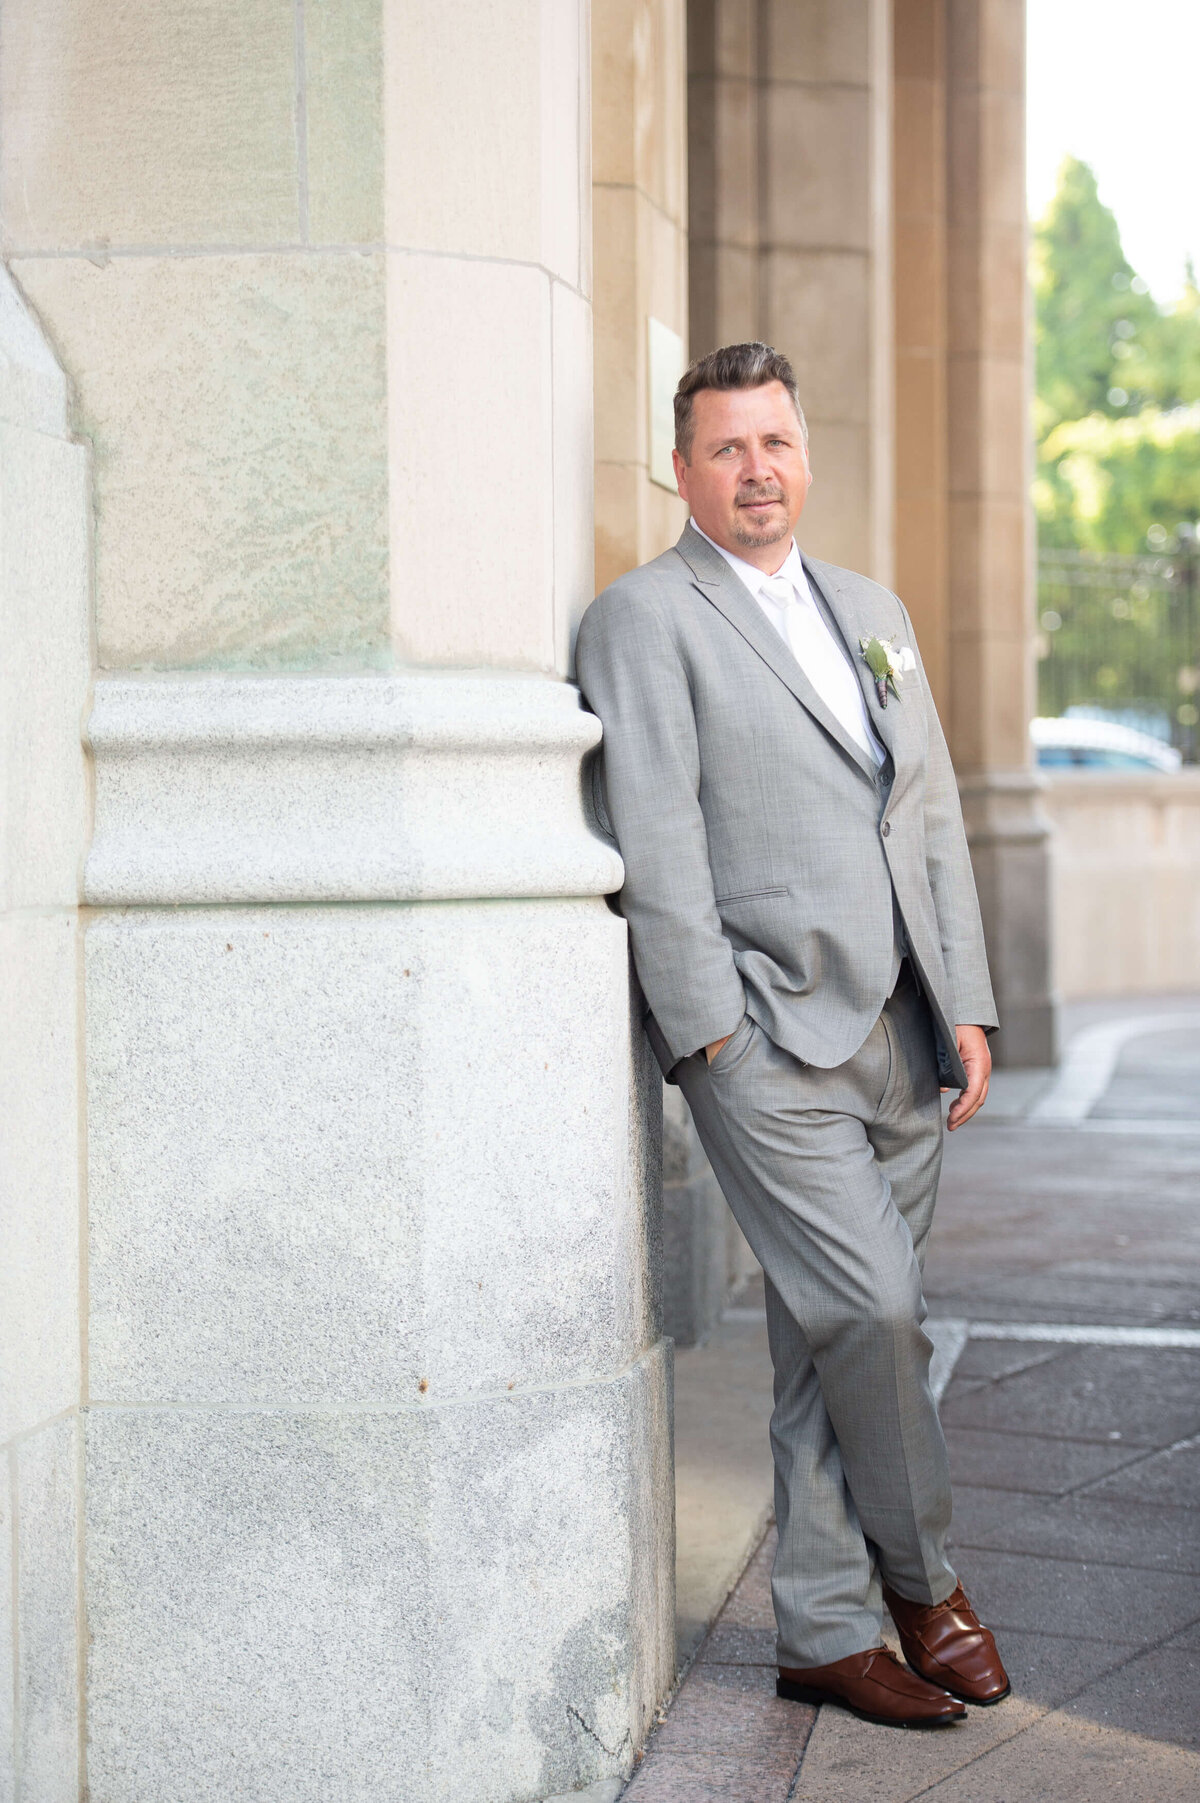 Ottawa wedding photography of a handsome groom  leaning on the pillars outside the Chateau Laurier  wedding venue